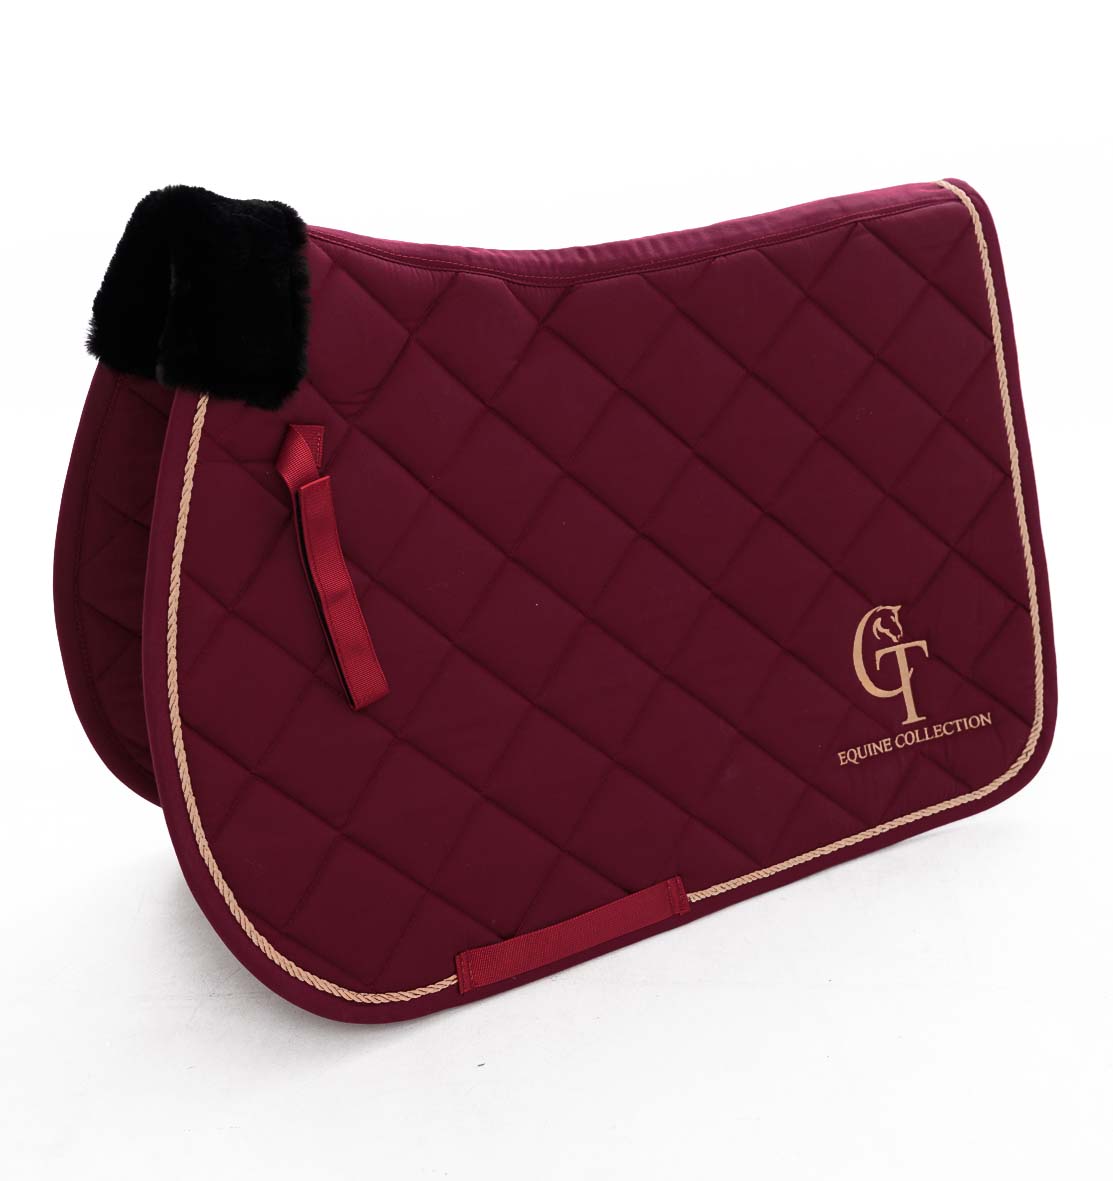 Shop Matchy Sets at CT Equine Collection